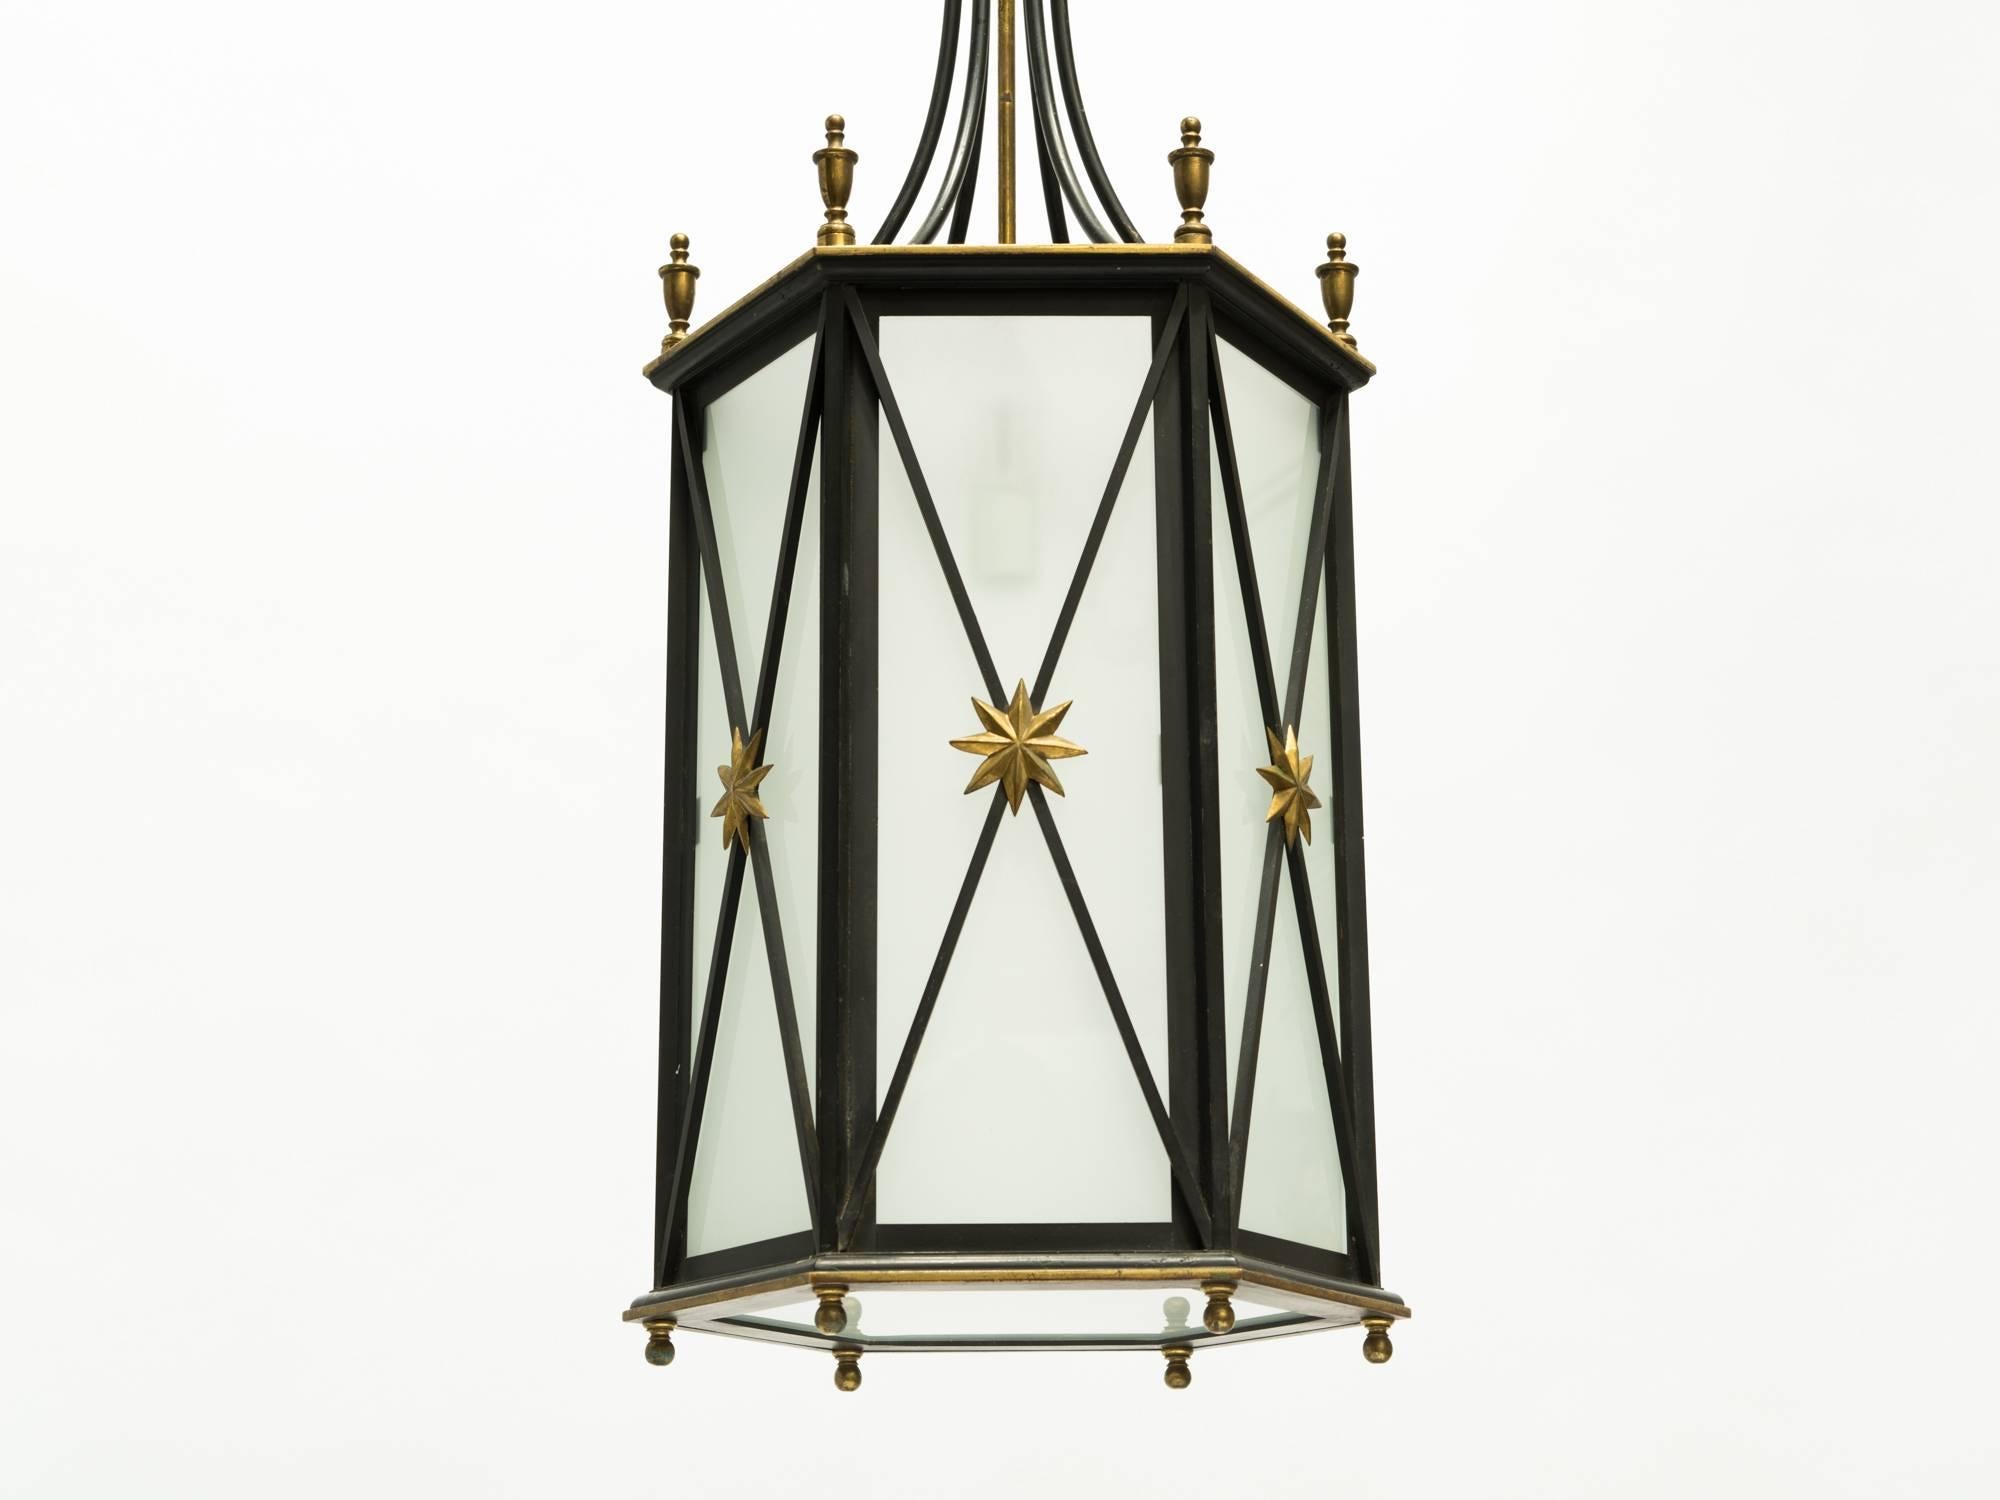 Restored classical 1920s lantern with frosted glass panels.